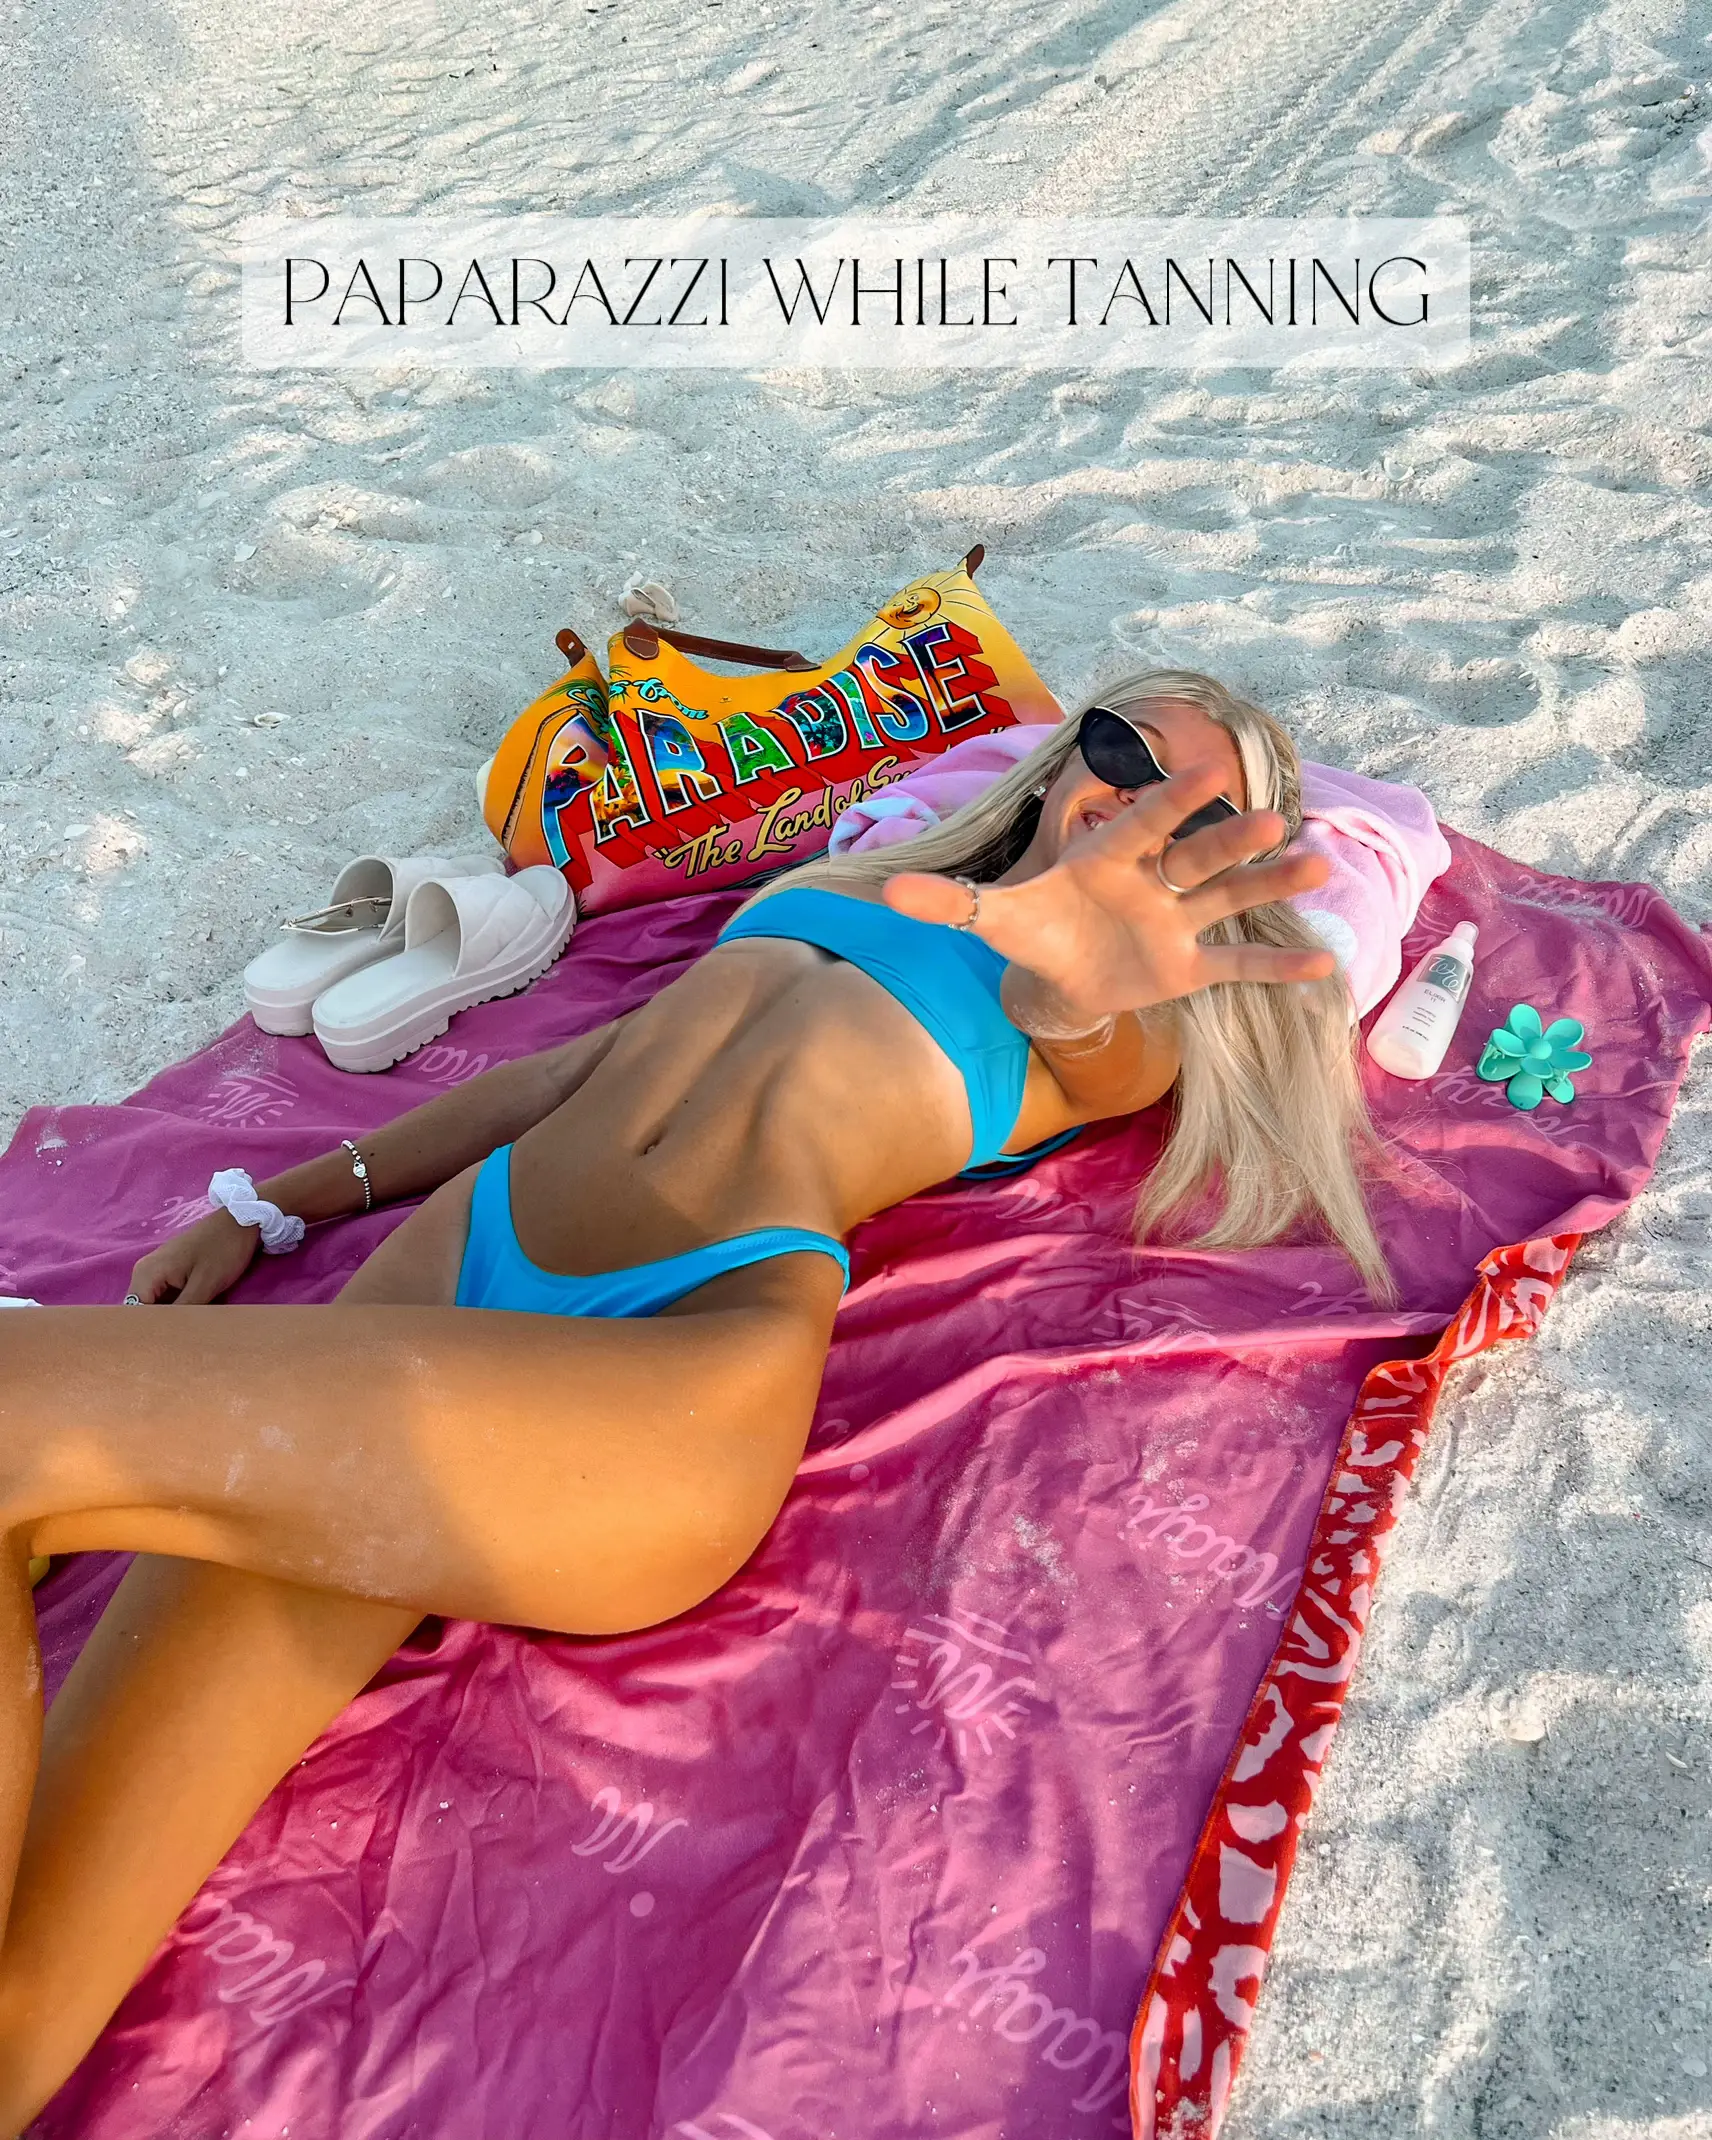  A woman is laying on a pink and white towel on the beach.